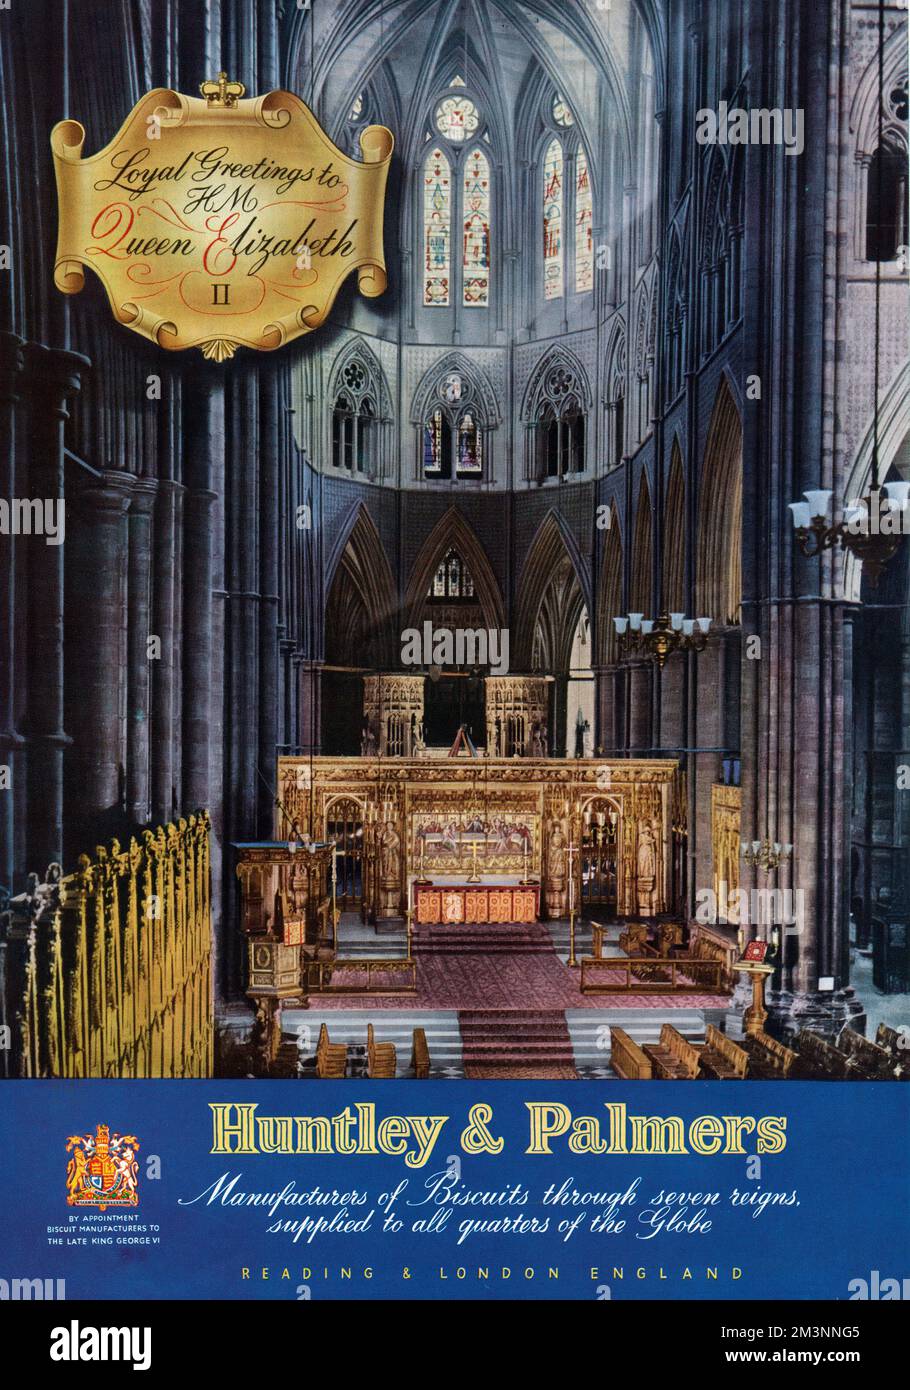 Advertisement for Huntley and Palmers, biscuit manufacturers in the special Coronation Number of the Illustrated London News.  The company display their royal warrant and a photograph of the interior of Westminster Abbey where the Coronation took place.     Date: 1953 Stock Photo